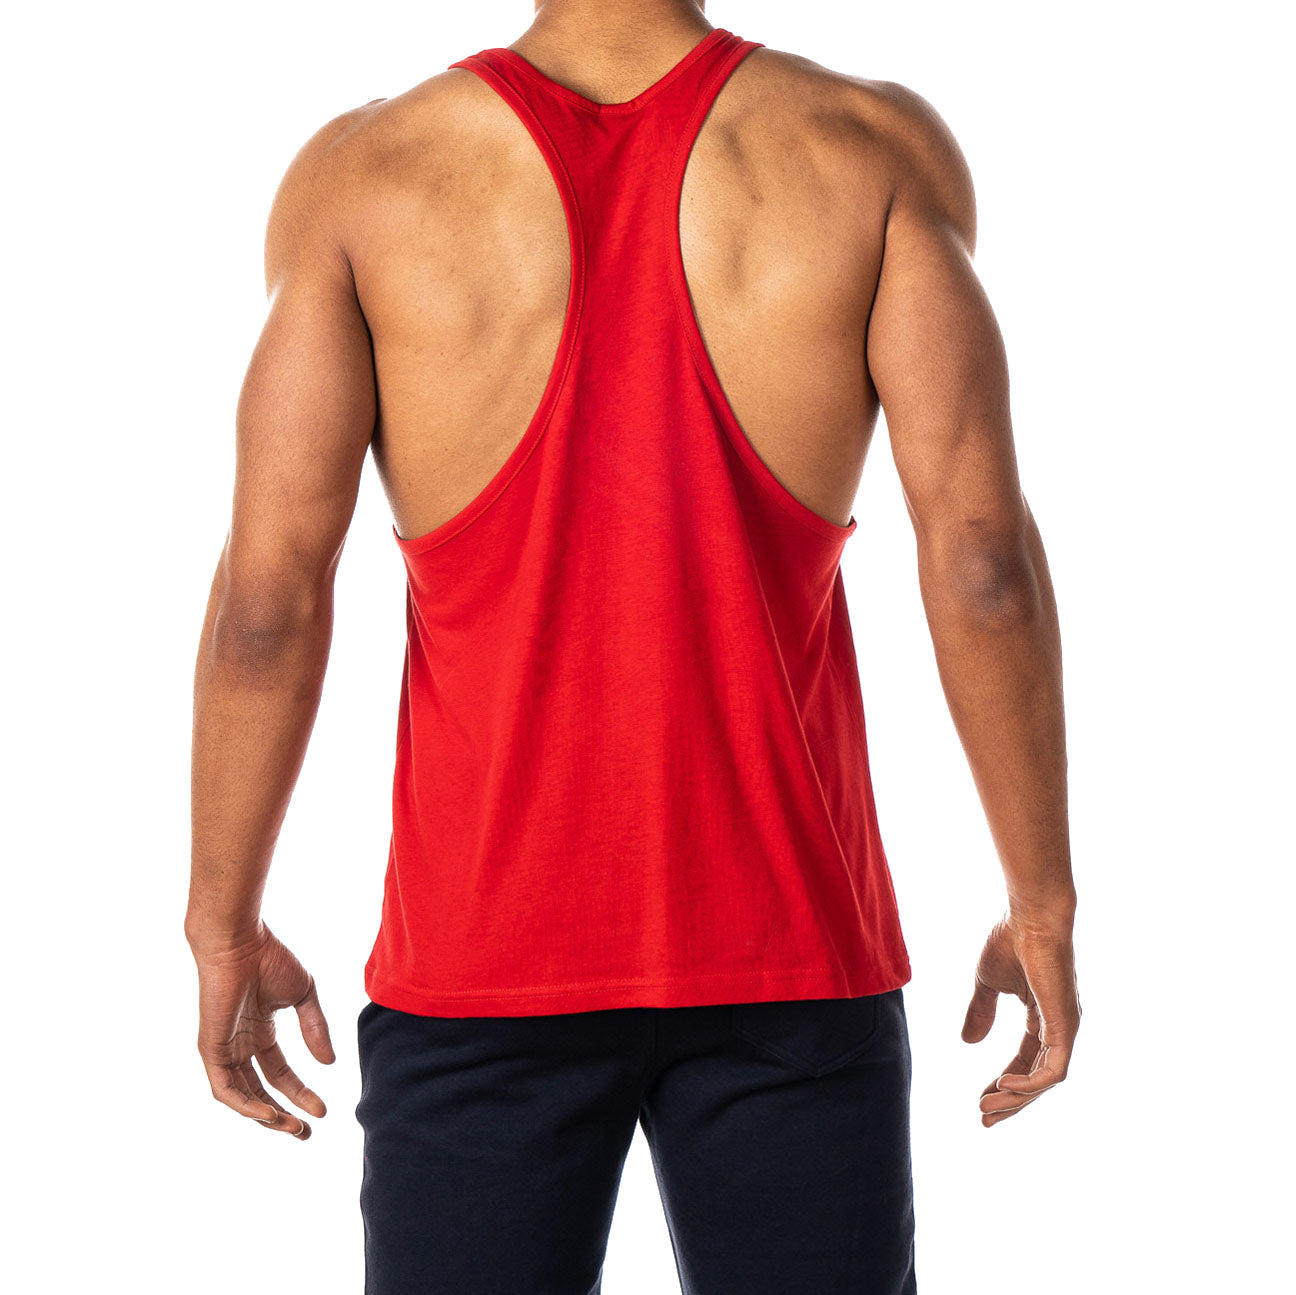 Muscle Cut Stringer Workout Tank Top T-Shirt by American Apparel